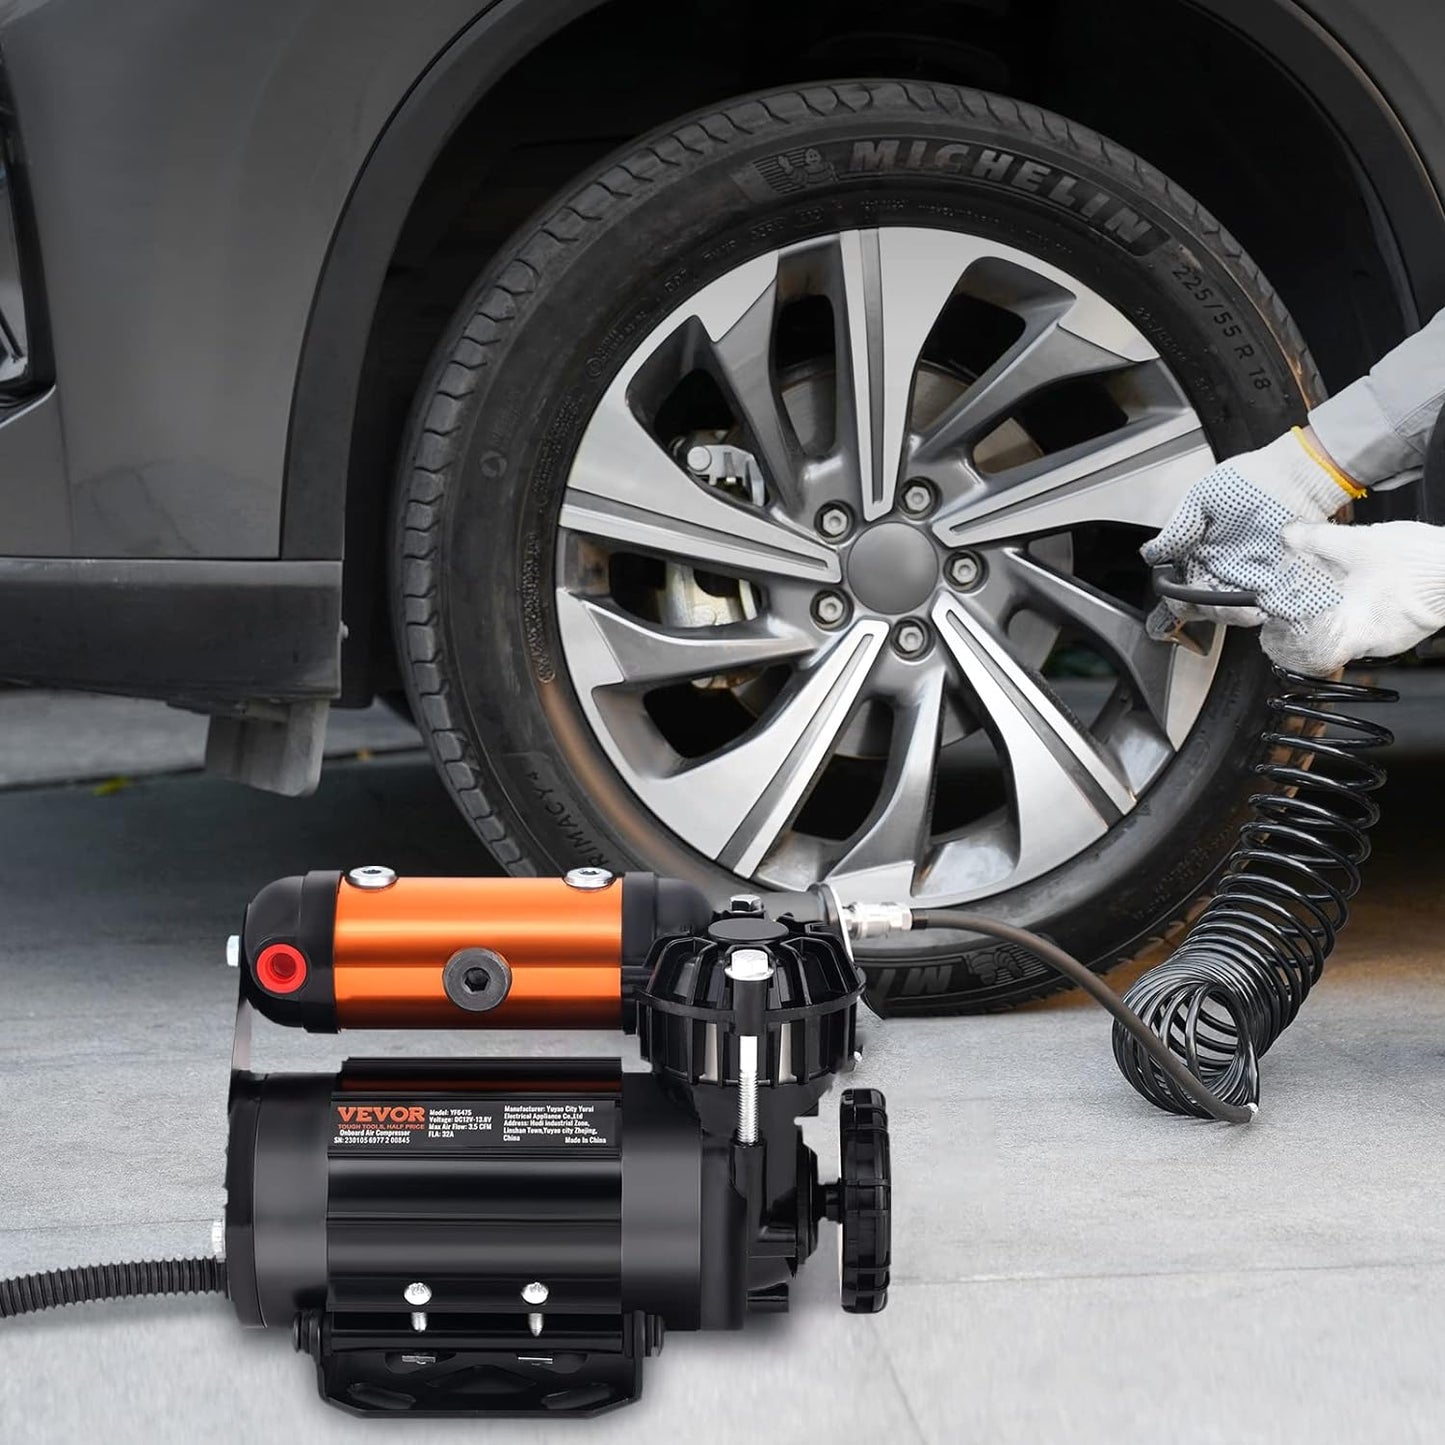 VEVOR Onboard Air Compressor Kit 150PSI Offroad Air Compressor Portable Tire Inflator Heavy Duty 3.5CFM Air Pump for Jeep SUV 4x4 Vehicle Compatibility with Air tools, Air horns, Lockers